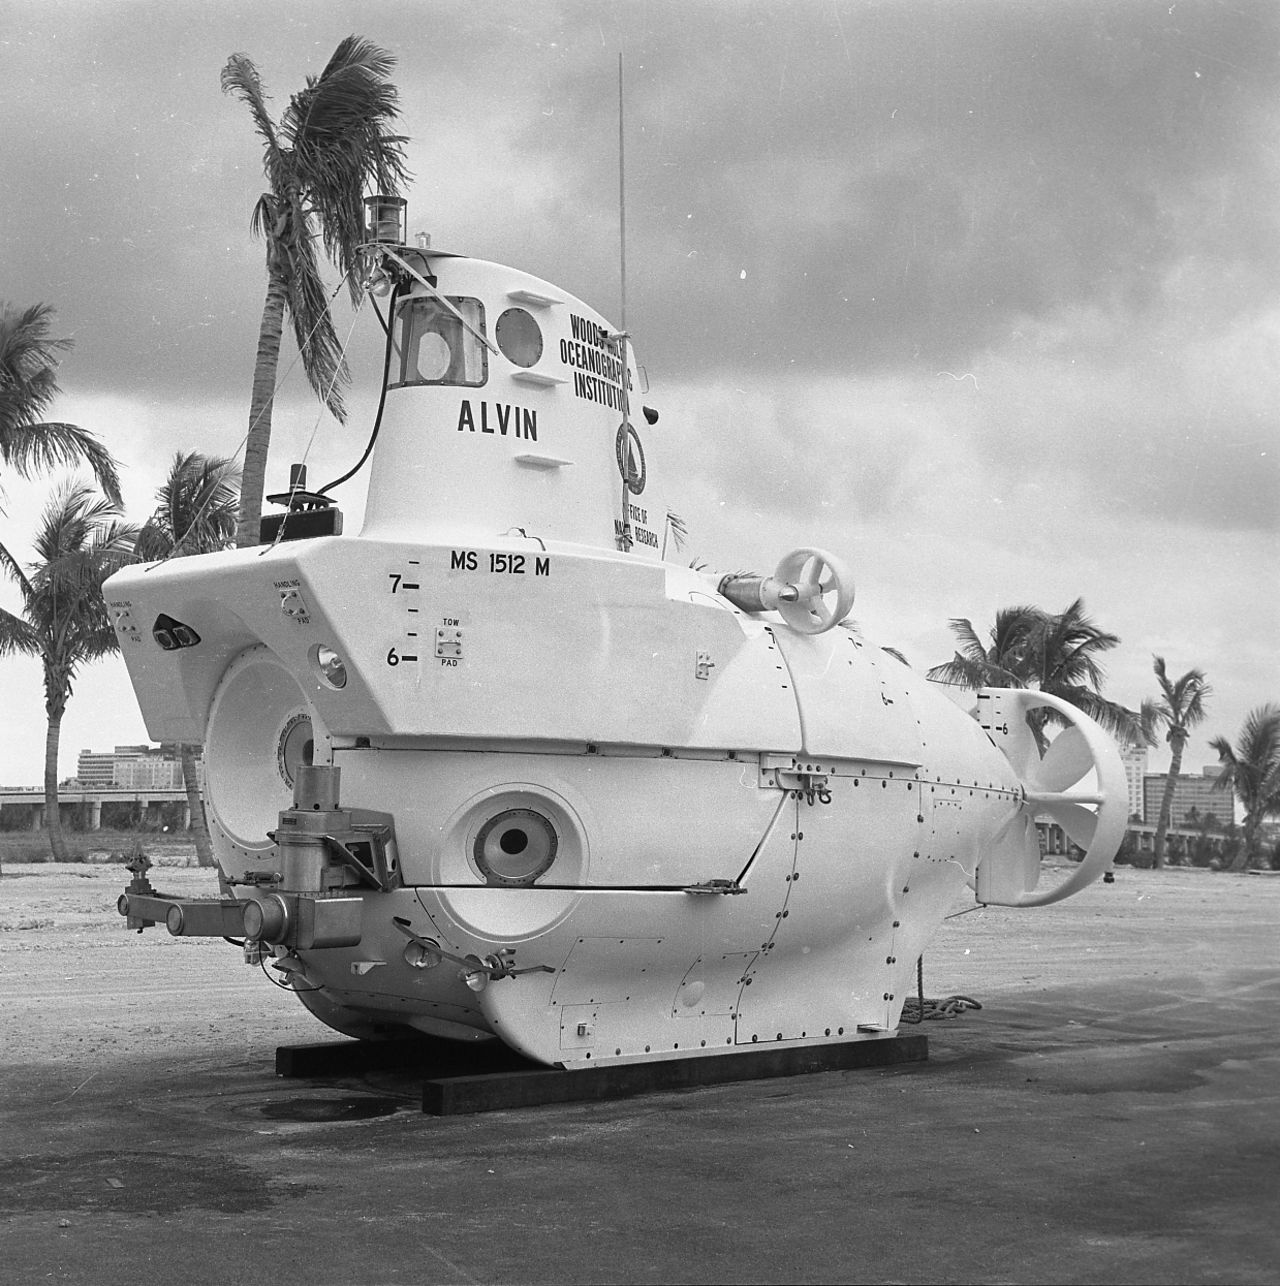 In 1977, the development of new technology allowed the human-occupied vehicle, "Alvin" to explore a volcanic ridge 2500 meters below sea-level. "This discovery changed our understanding of how life can function here on Earth and opened entirely new fields of research," says German.